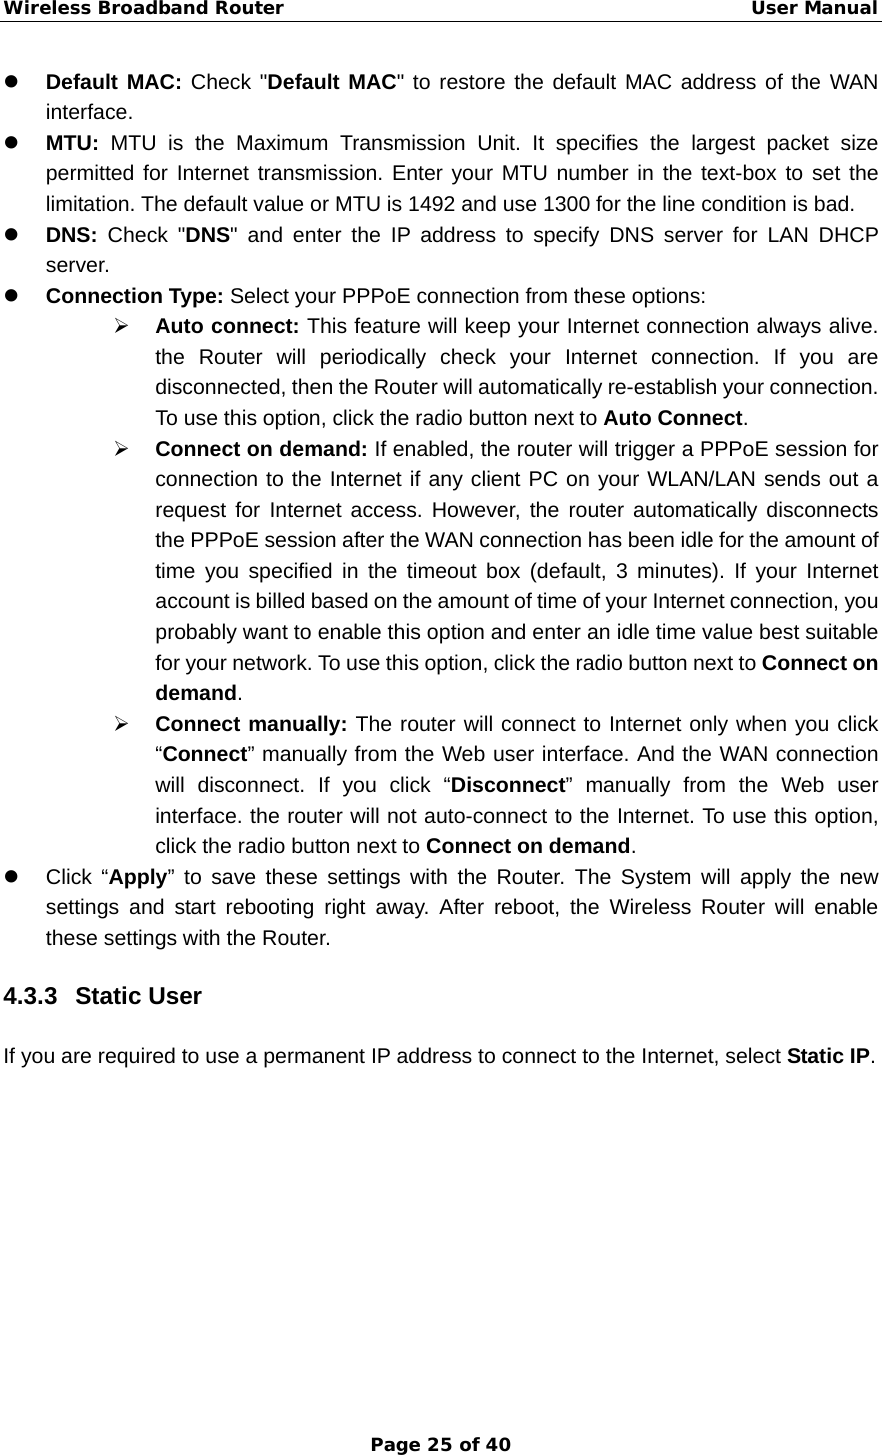 Wireless Broadband Router                                                   User Manual Page 25 of 40 z Default MAC: Check &quot;Default MAC&quot; to restore the default MAC address of the WAN interface. z MTU: MTU is the Maximum Transmission Unit. It specifies the largest packet size permitted for Internet transmission. Enter your MTU number in the text-box to set the limitation. The default value or MTU is 1492 and use 1300 for the line condition is bad. z DNS:  Check &quot;DNS&quot; and enter the IP address to specify DNS server for LAN DHCP server. z Connection Type: Select your PPPoE connection from these options: ¾ Auto connect: This feature will keep your Internet connection always alive. the Router will periodically check your Internet connection. If you are disconnected, then the Router will automatically re-establish your connection. To use this option, click the radio button next to Auto Connect. ¾ Connect on demand: If enabled, the router will trigger a PPPoE session for connection to the Internet if any client PC on your WLAN/LAN sends out a request for Internet access. However, the router automatically disconnects the PPPoE session after the WAN connection has been idle for the amount of time you specified in the timeout box (default, 3 minutes). If your Internet account is billed based on the amount of time of your Internet connection, you probably want to enable this option and enter an idle time value best suitable for your network. To use this option, click the radio button next to Connect on demand. ¾ Connect manually: The router will connect to Internet only when you click “Connect” manually from the Web user interface. And the WAN connection will disconnect. If you click “Disconnect” manually from the Web user interface. the router will not auto-connect to the Internet. To use this option, click the radio button next to Connect on demand. z Click “Apply” to save these settings with the Router. The System will apply the new settings and start rebooting right away. After reboot, the Wireless Router will enable these settings with the Router. 4.3.3 Static User If you are required to use a permanent IP address to connect to the Internet, select Static IP.  